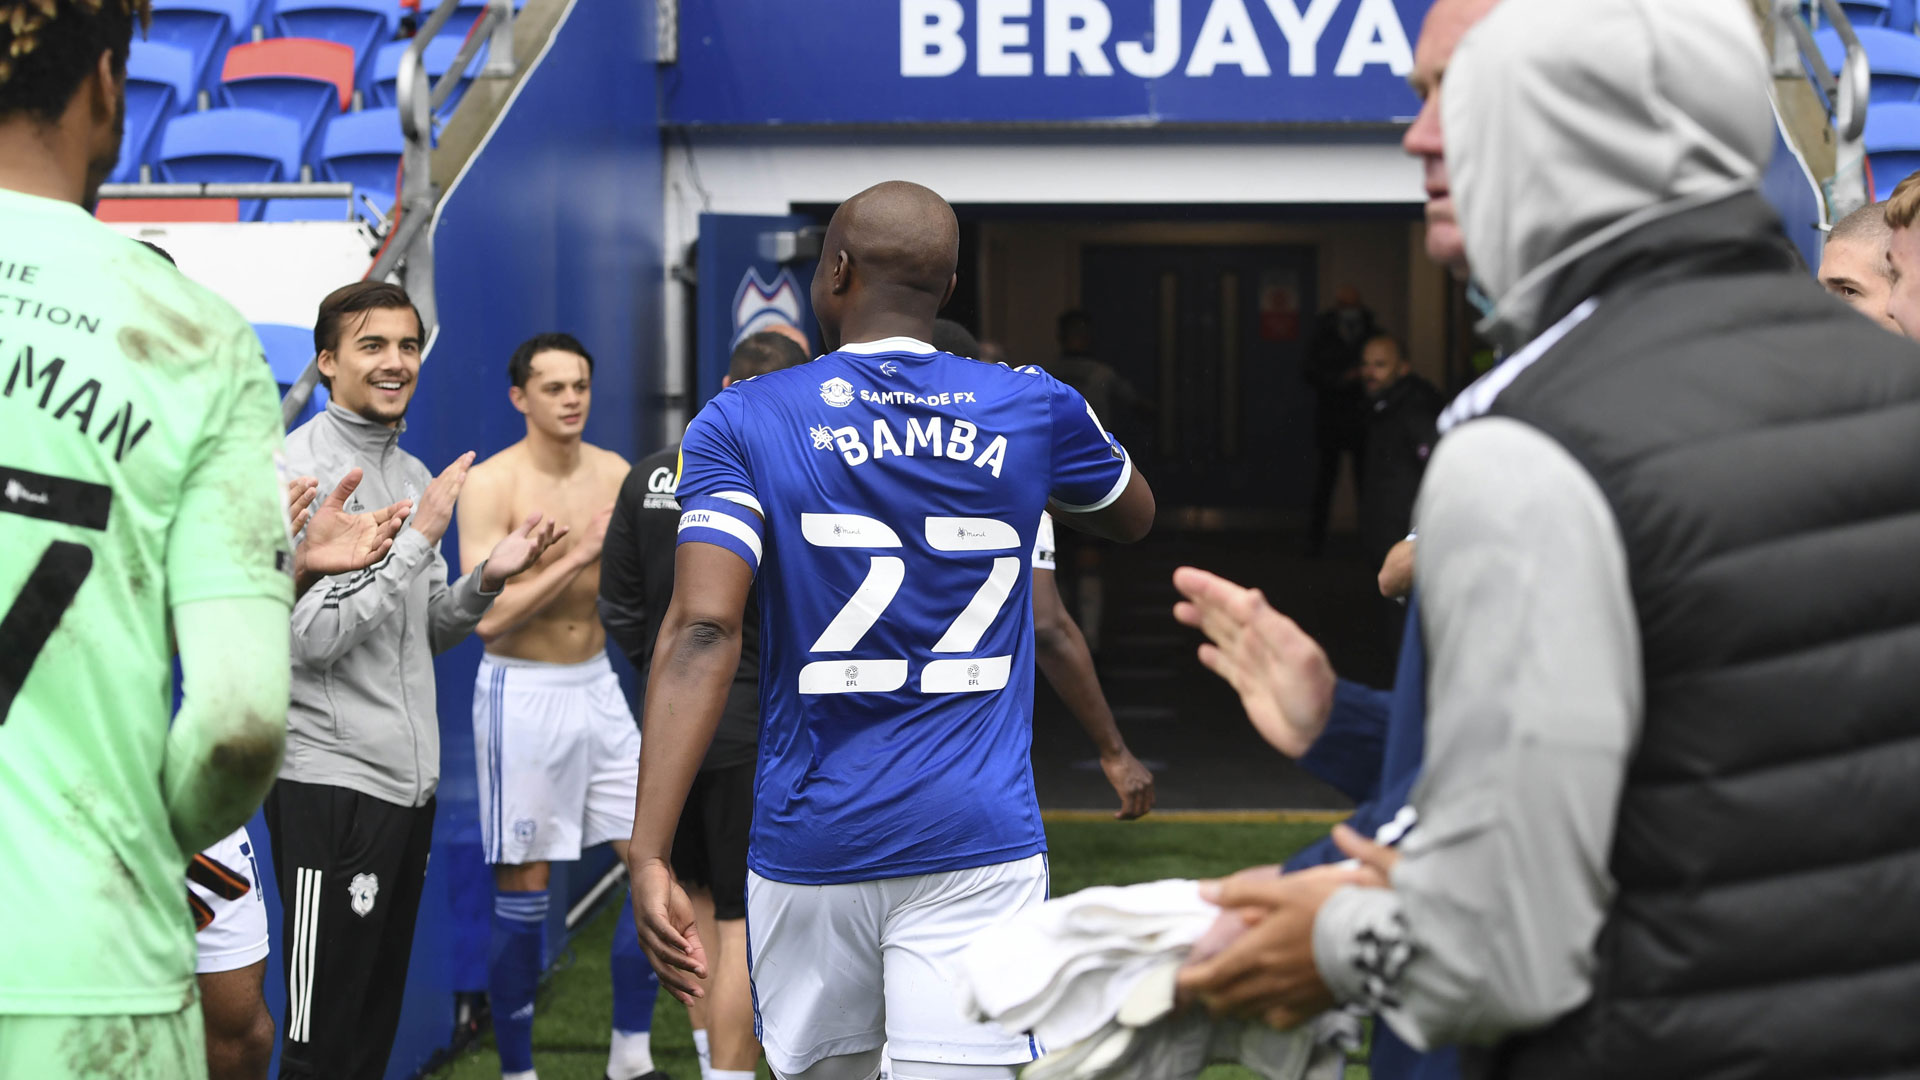 City legend Sol Bamba walks down the tunnel at CCS!